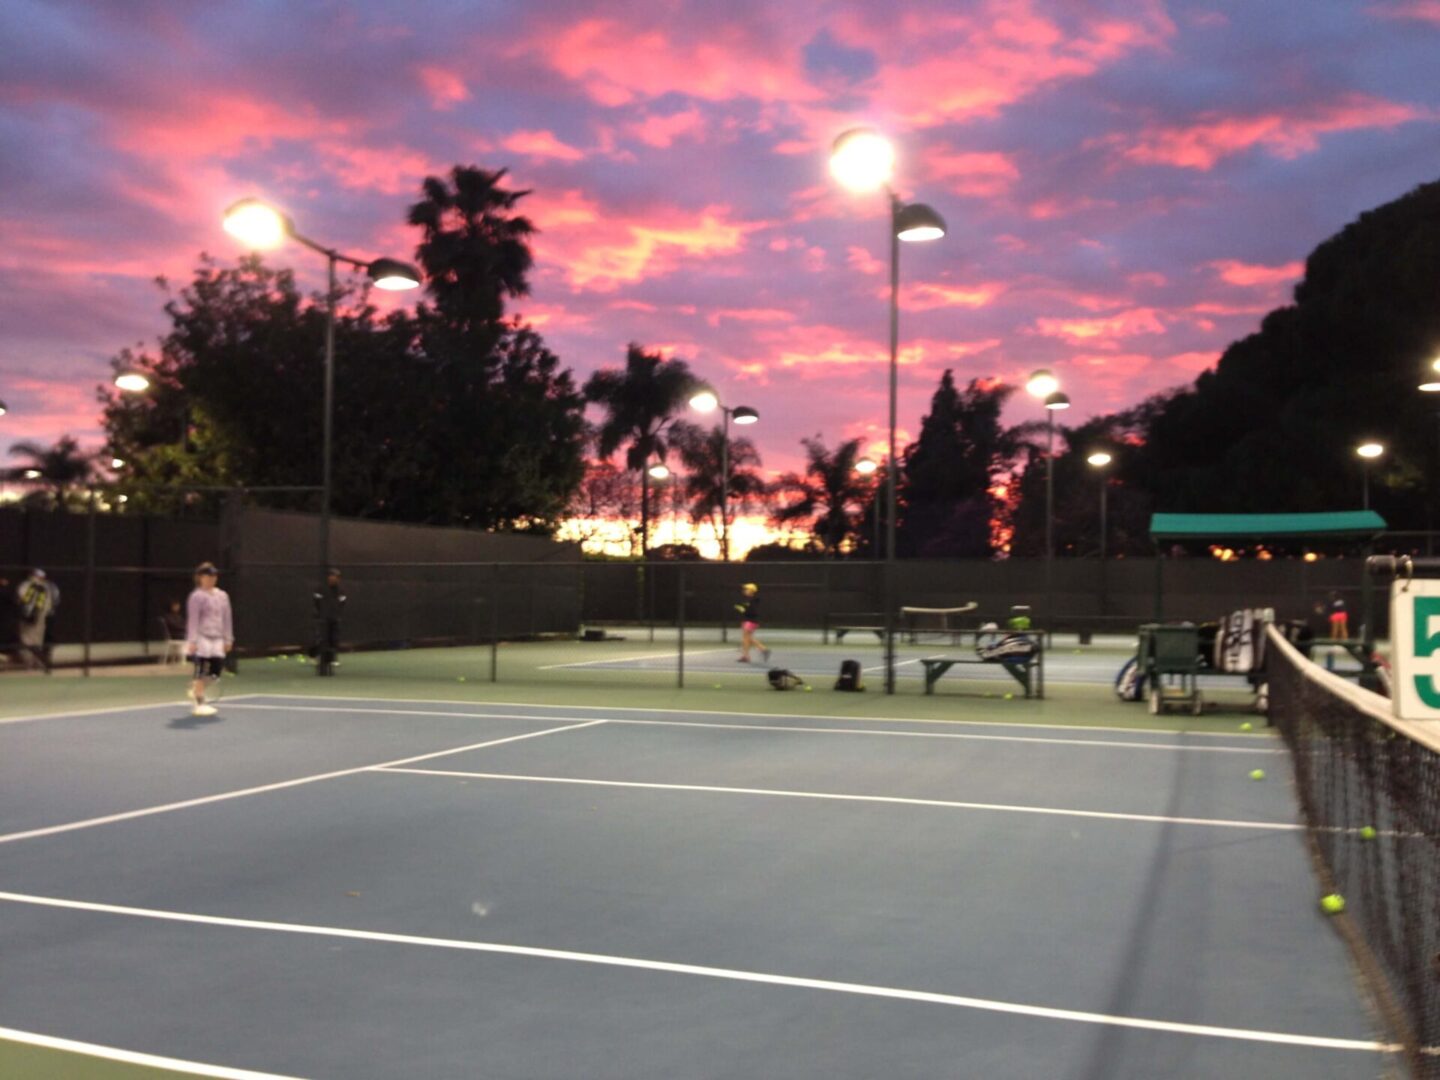 A Tennis Court With a Pink and Purple Sky